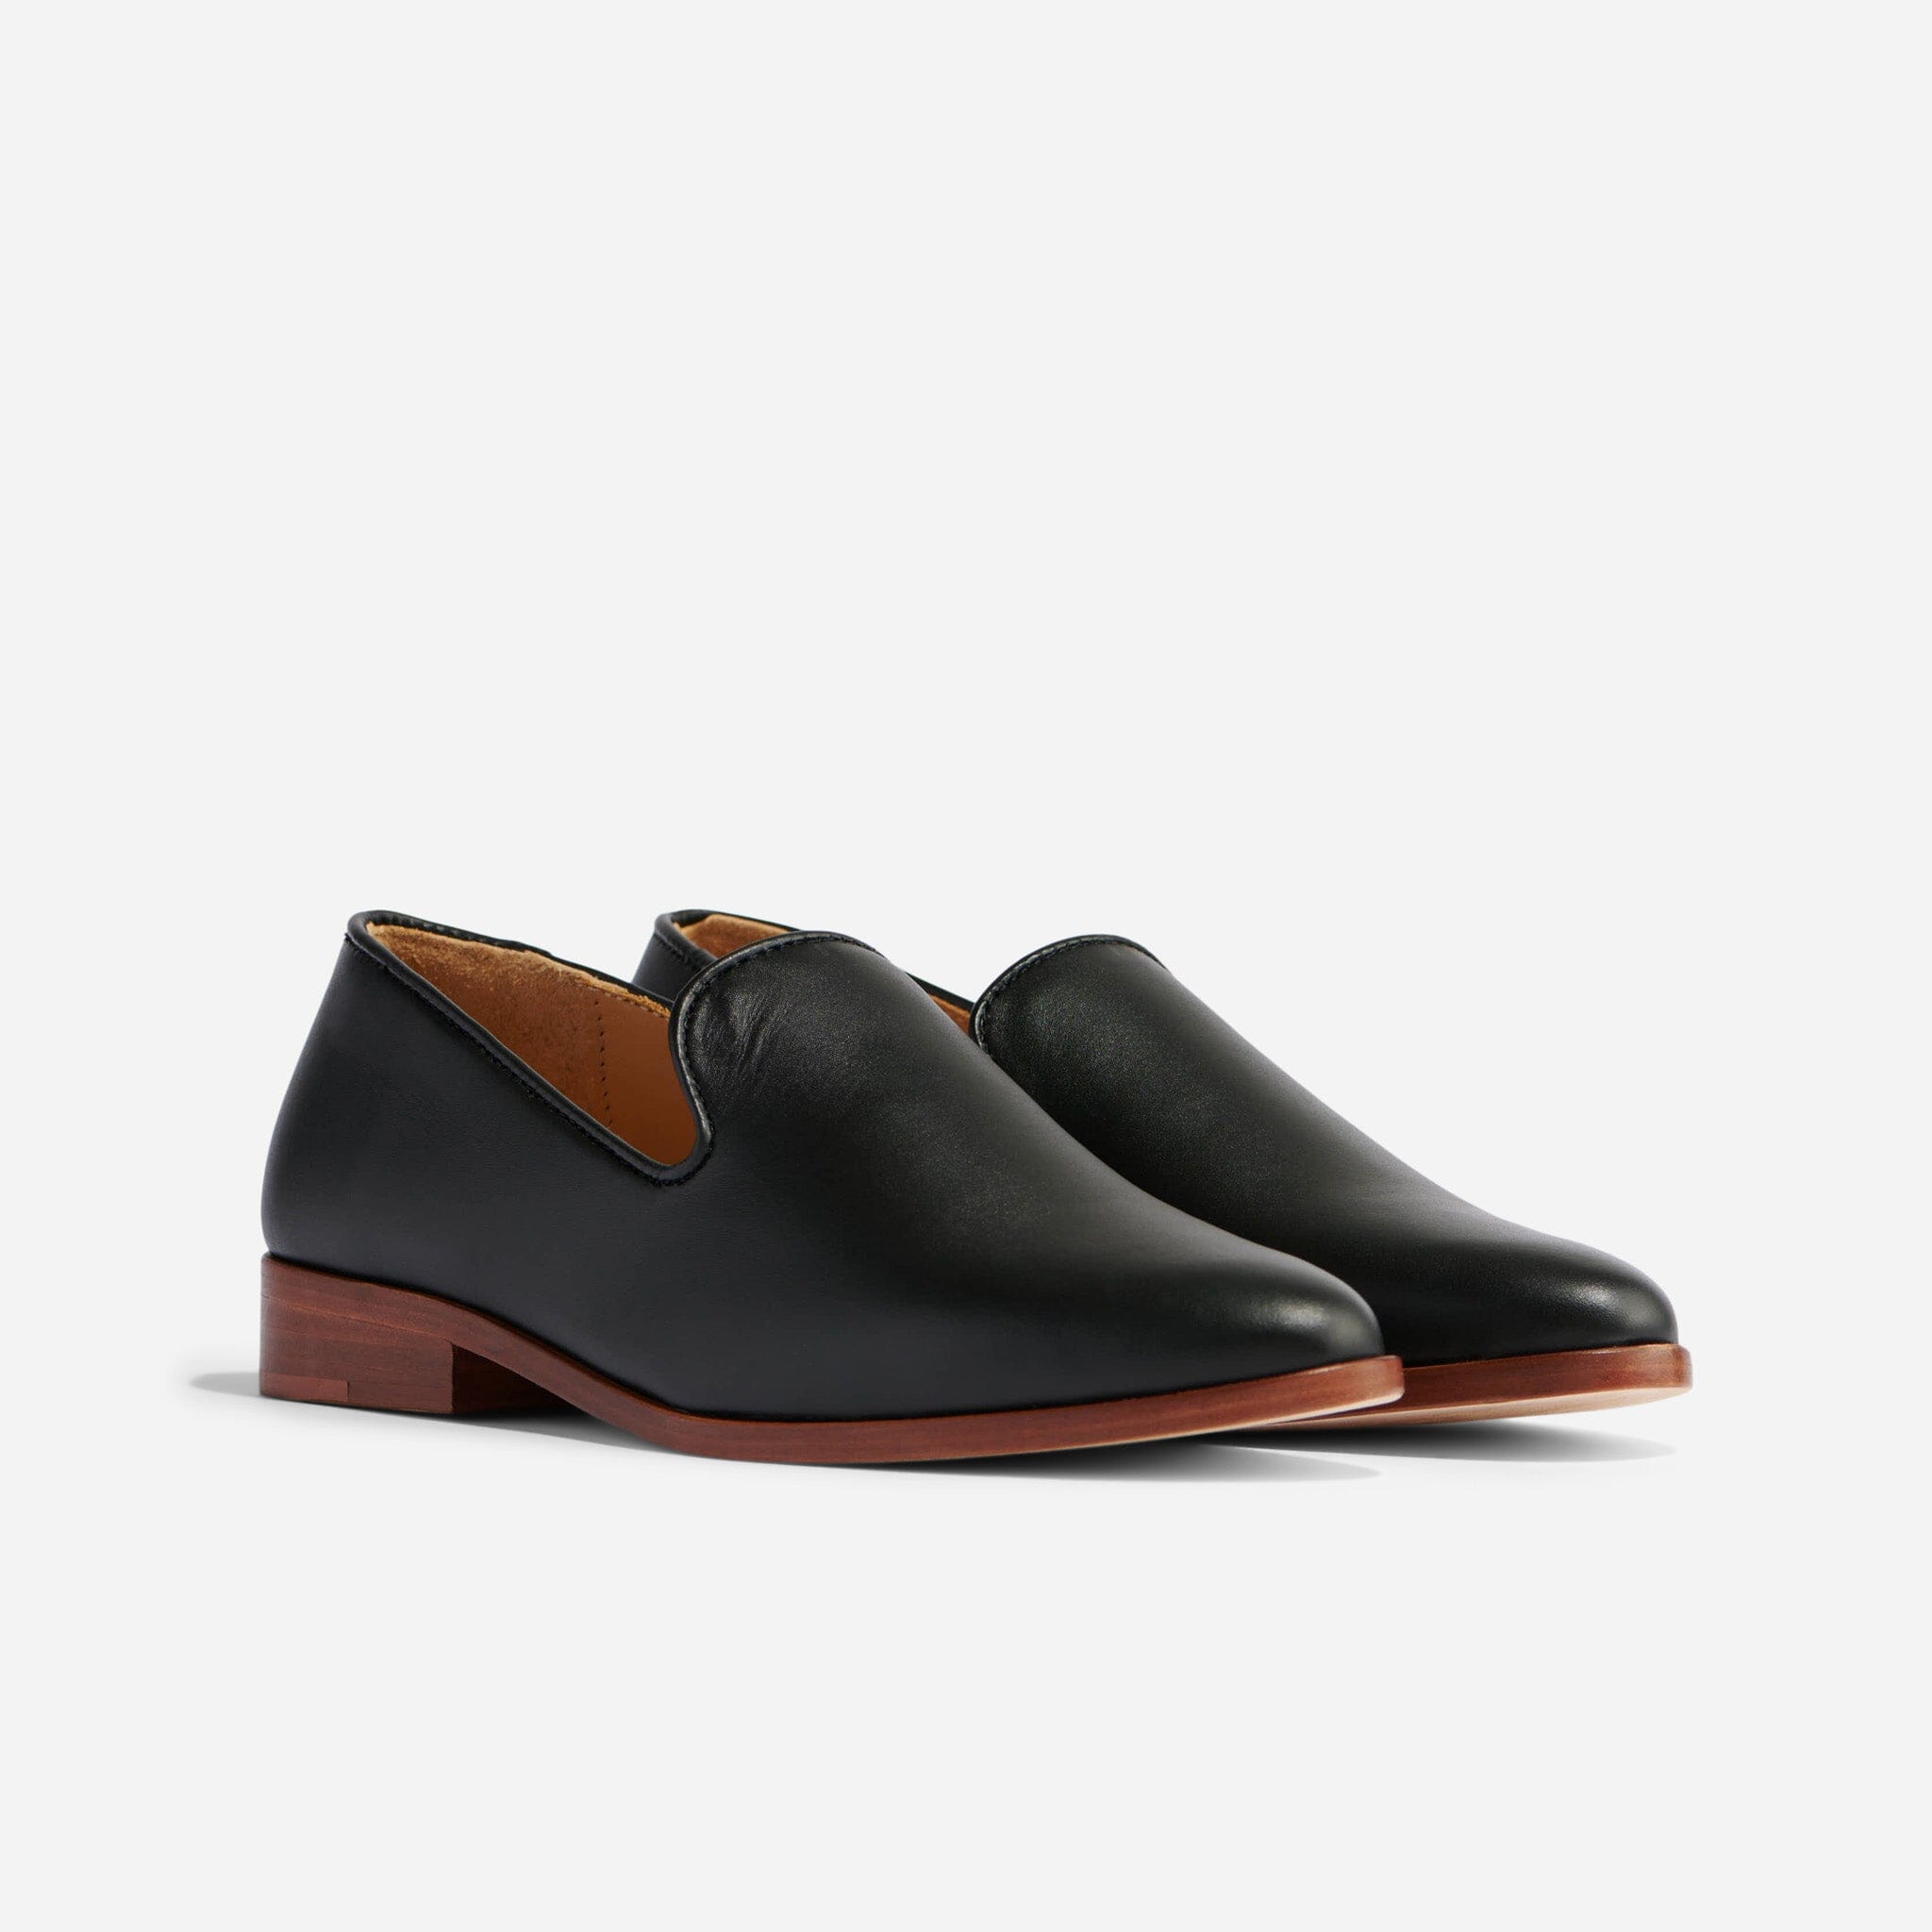 LEATHER PENNY LOAFERS - Brown | ZARA United States